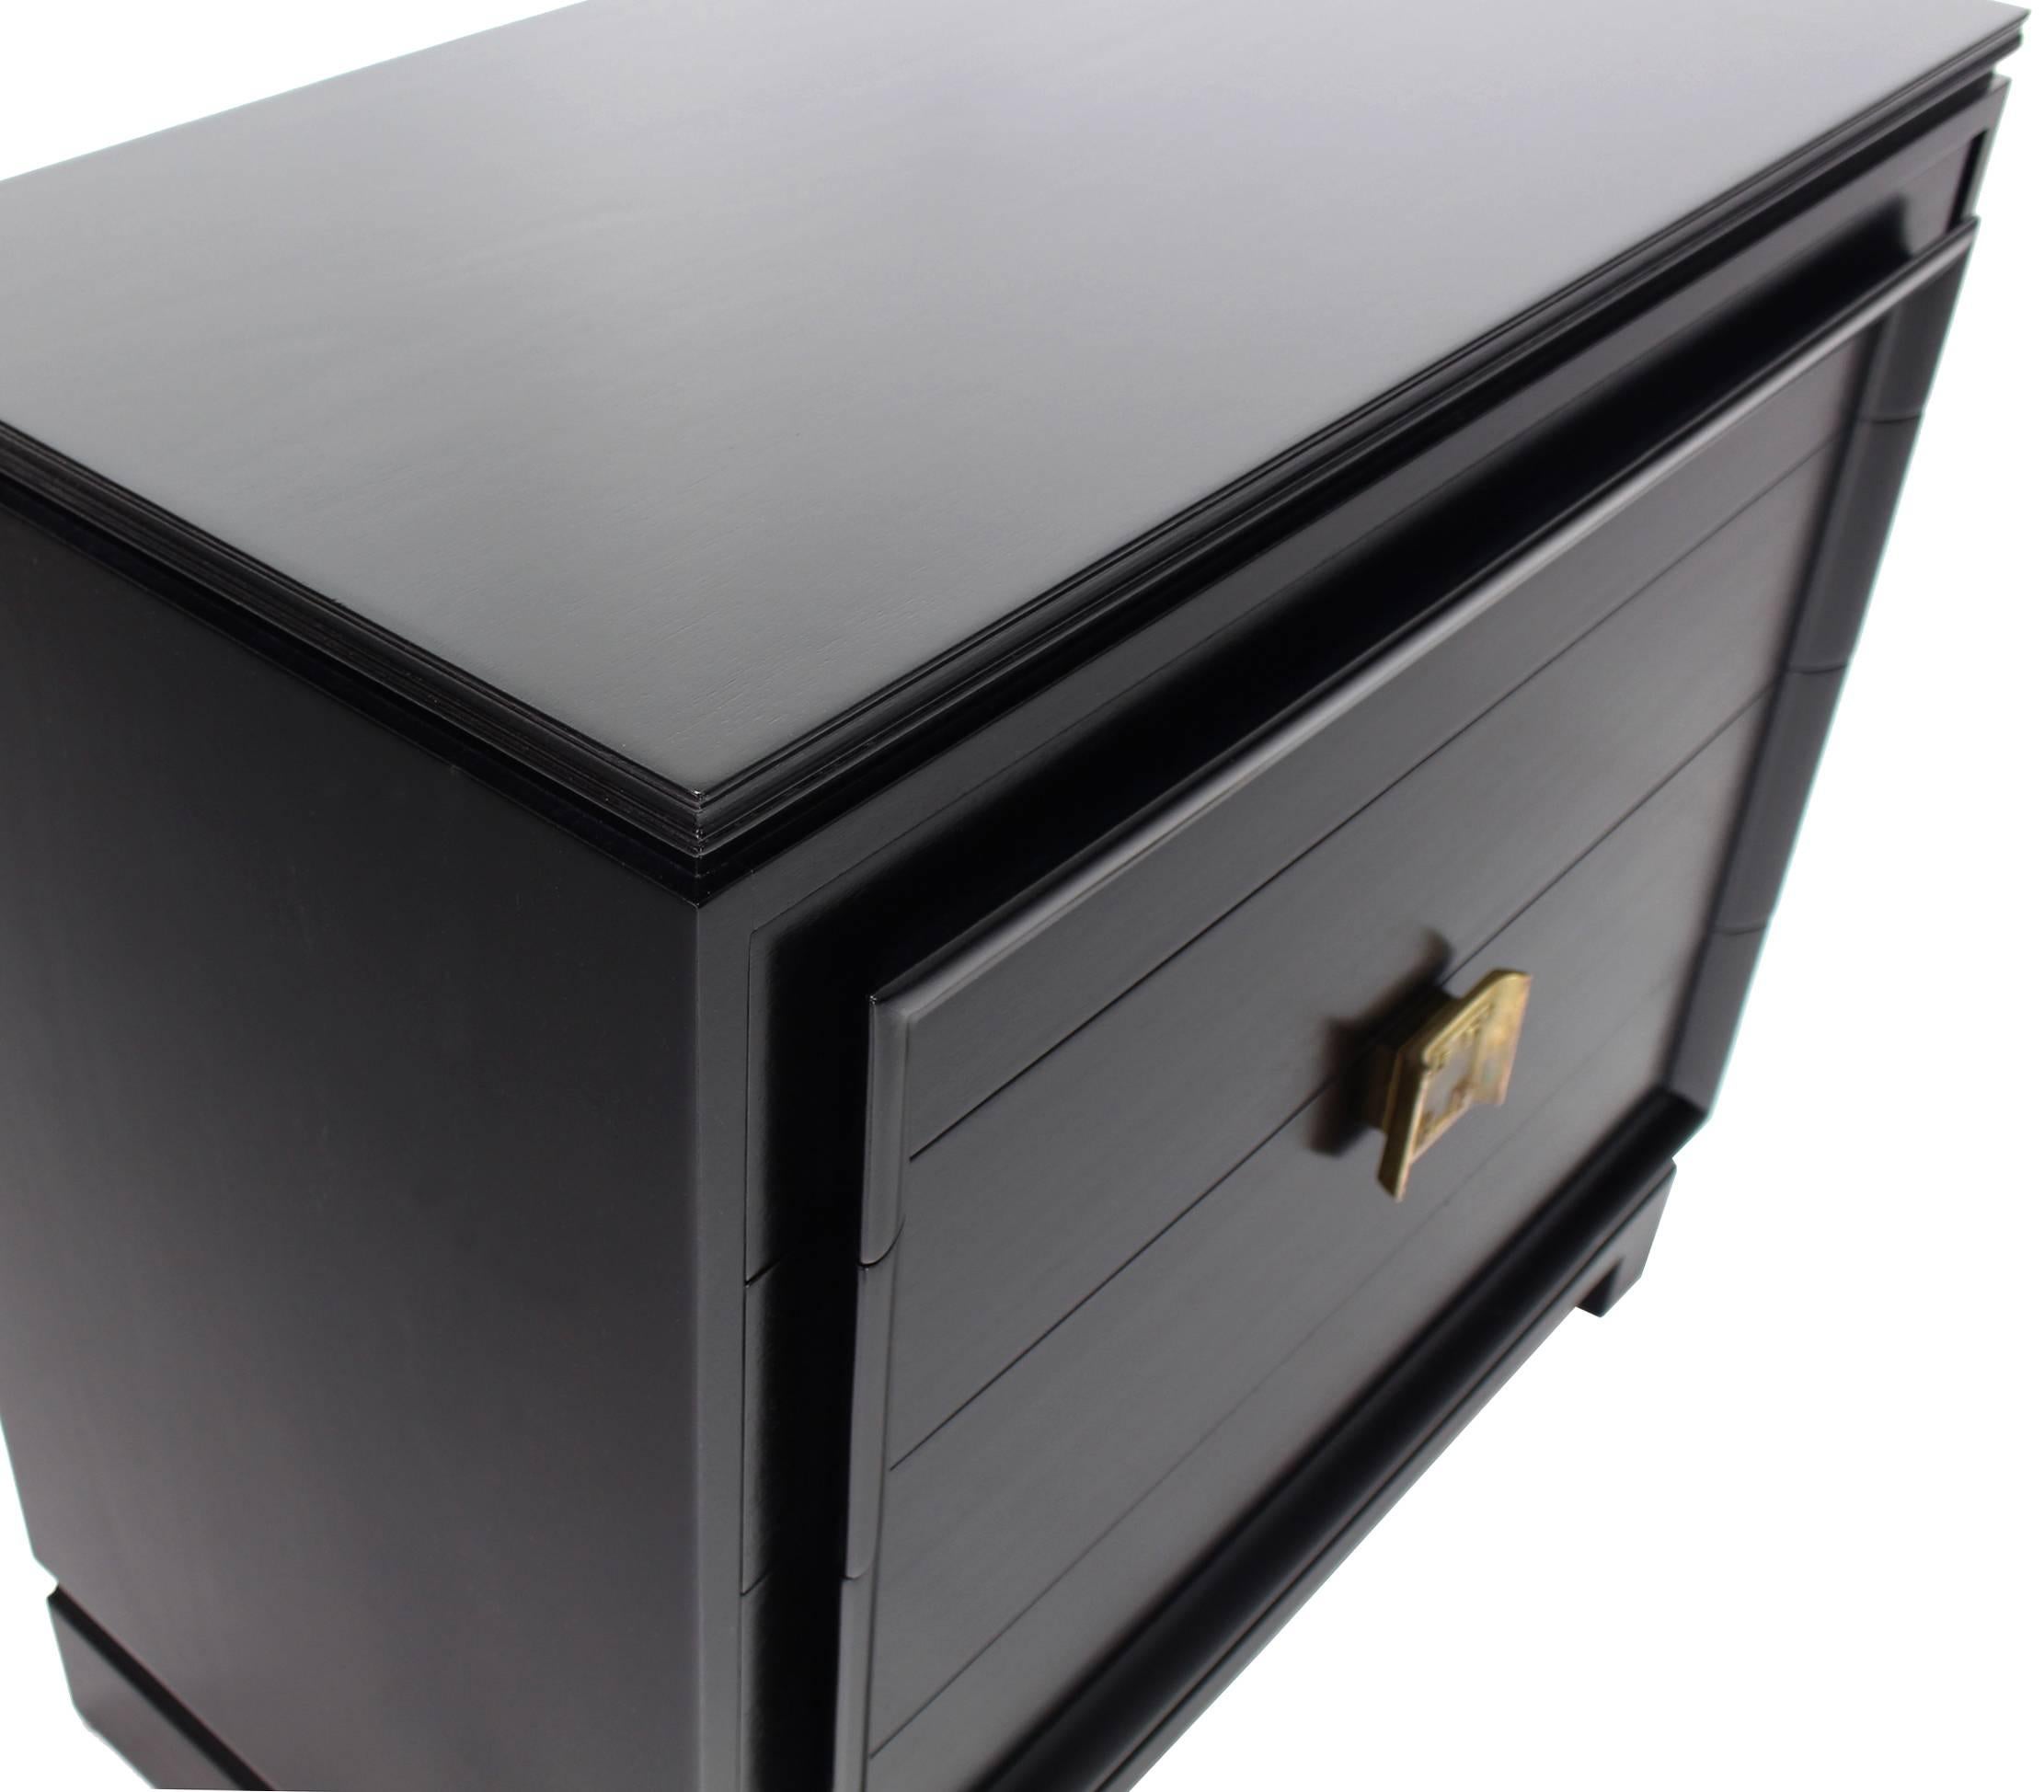 black bachelor chest of drawers